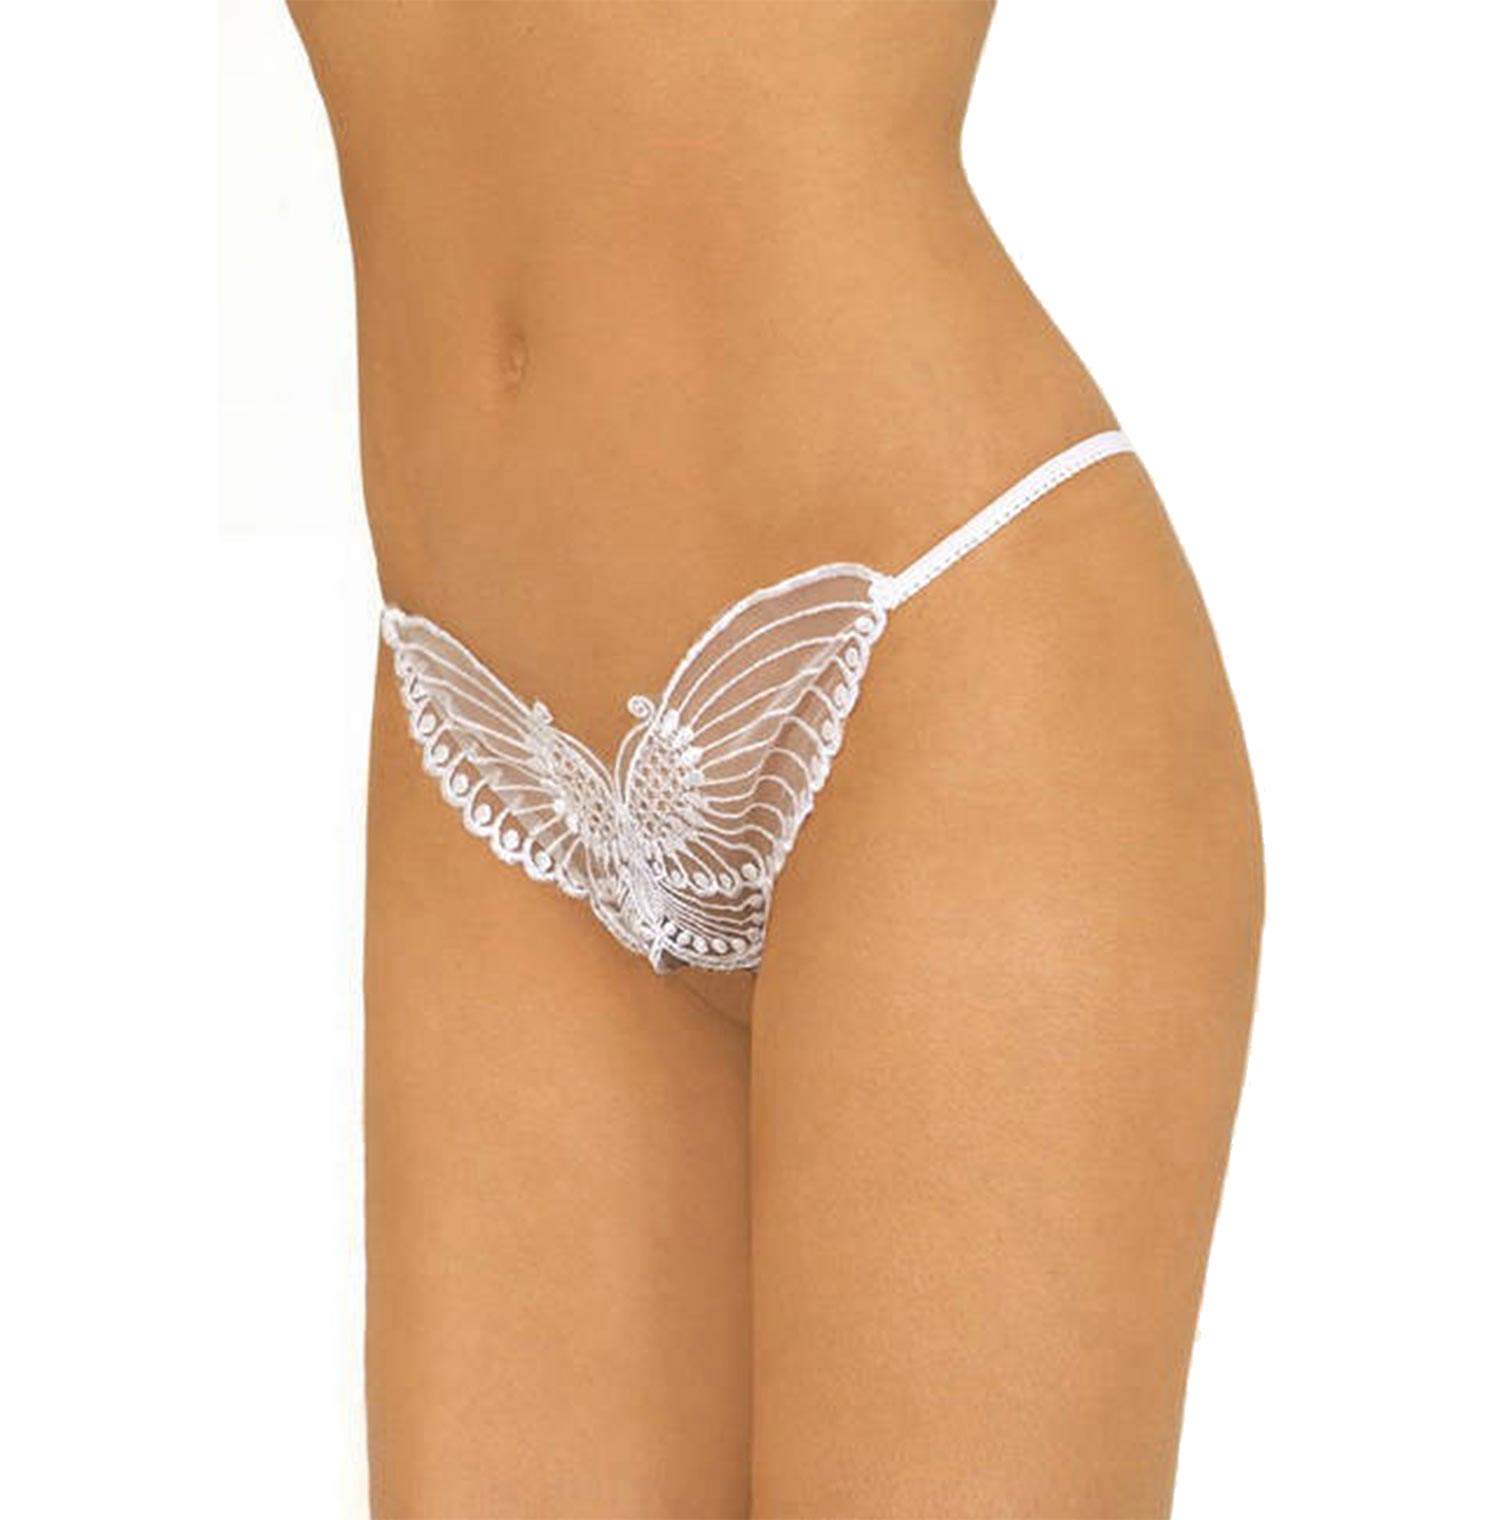 Attractive Butterfly Designs G-String Thong Panties, Lingerie, Panties Free  Delivery India.